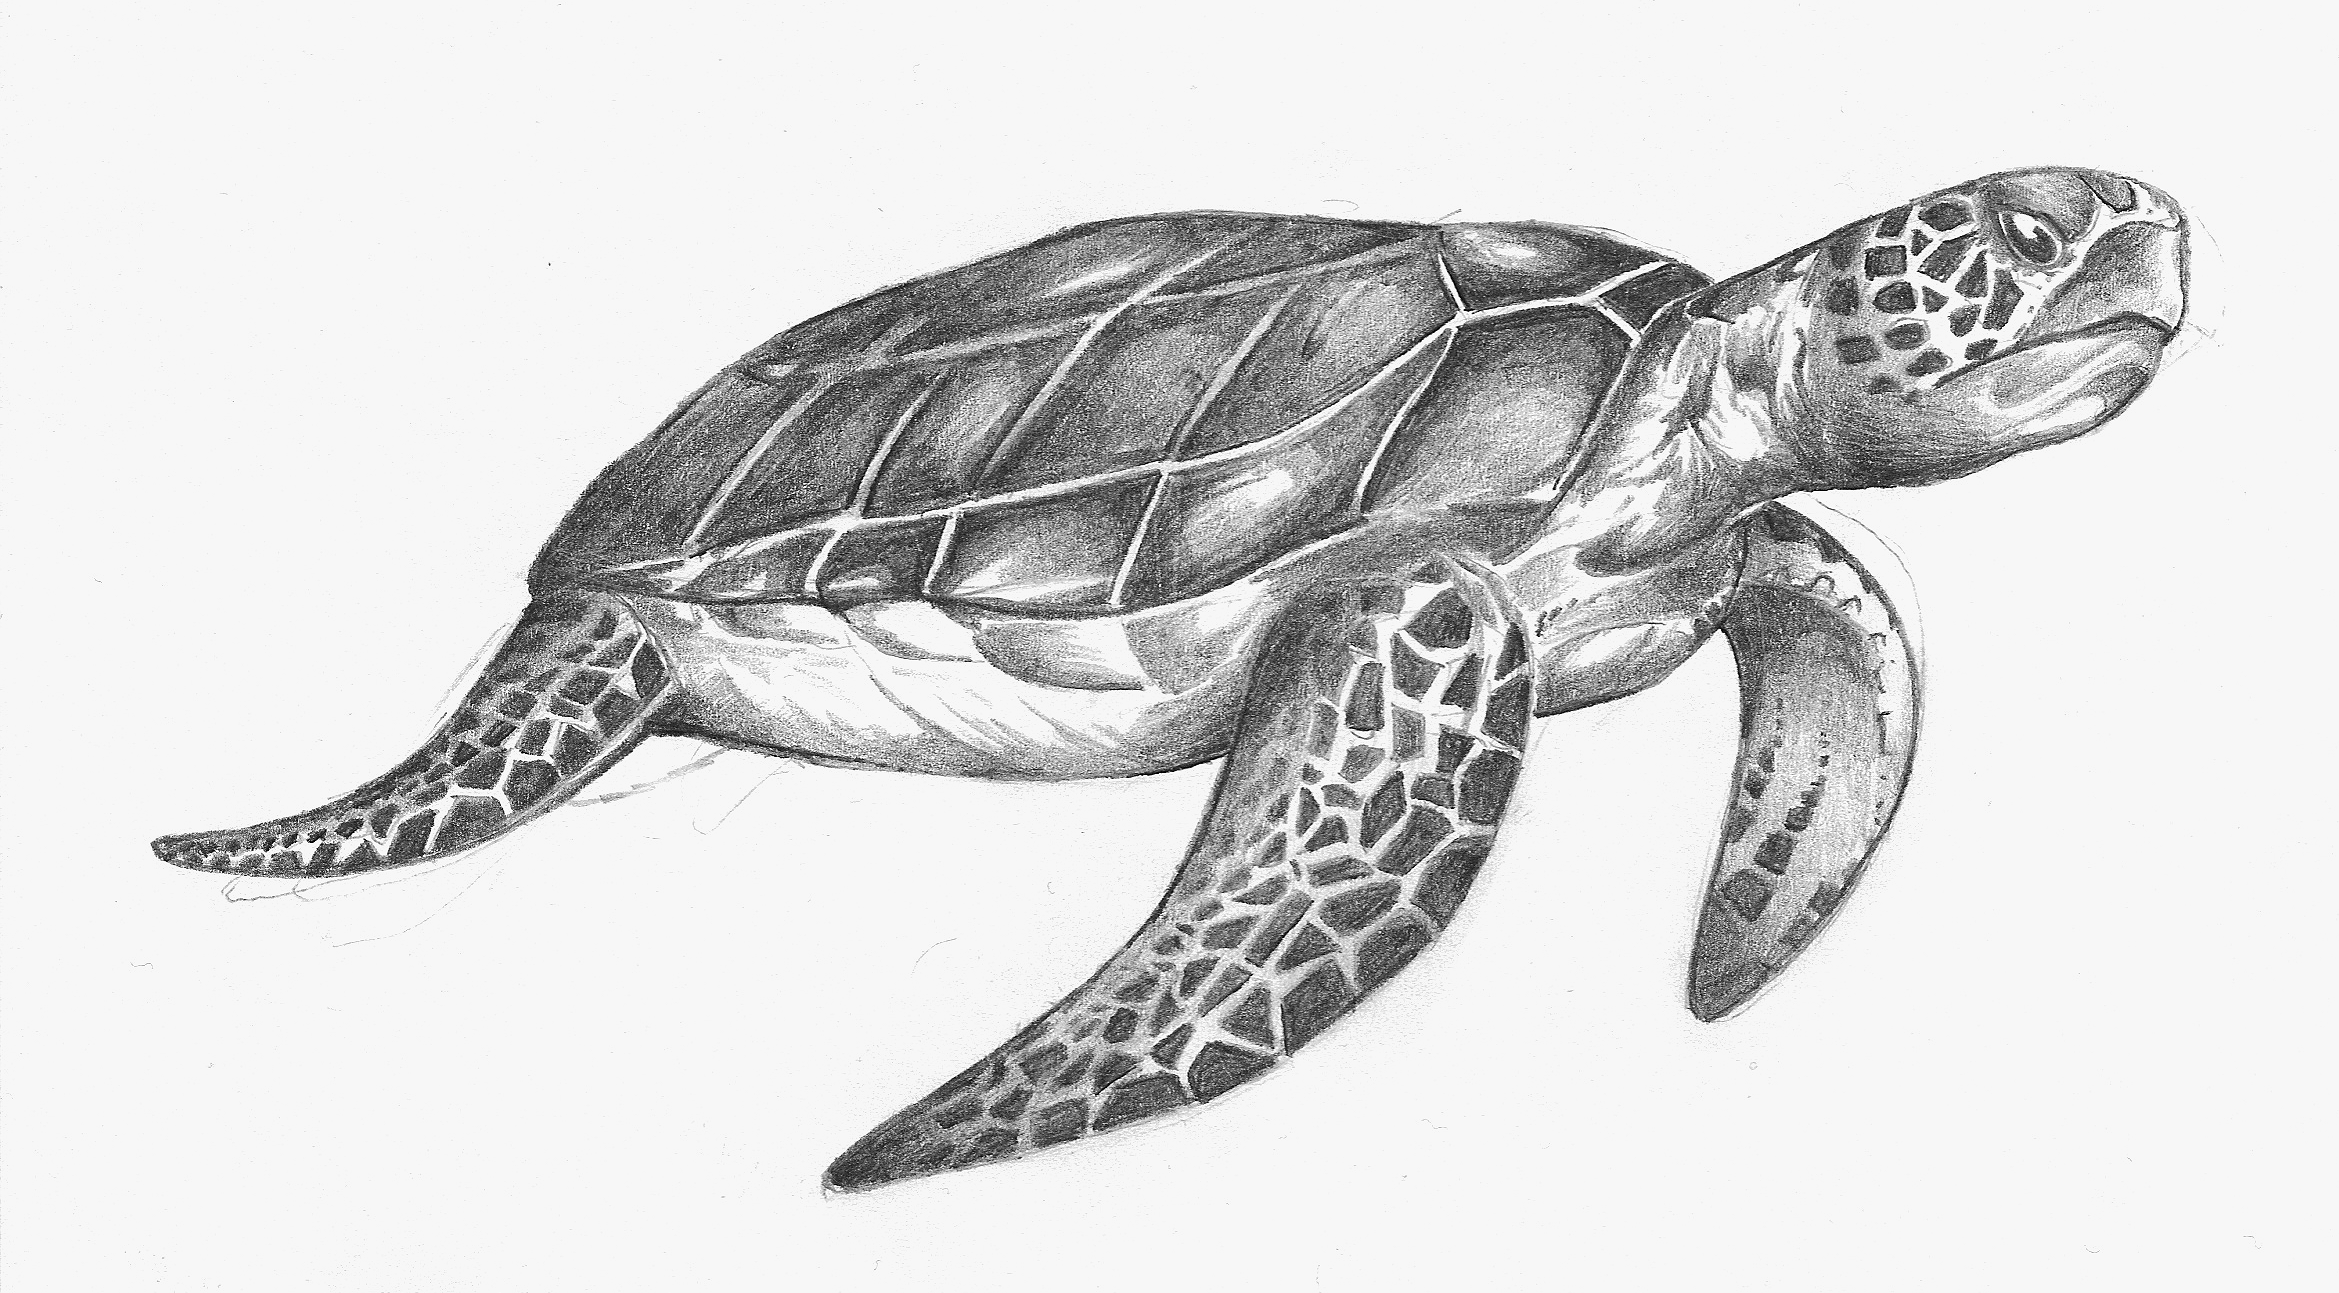 Turtle Sketch Vector Images over 3100